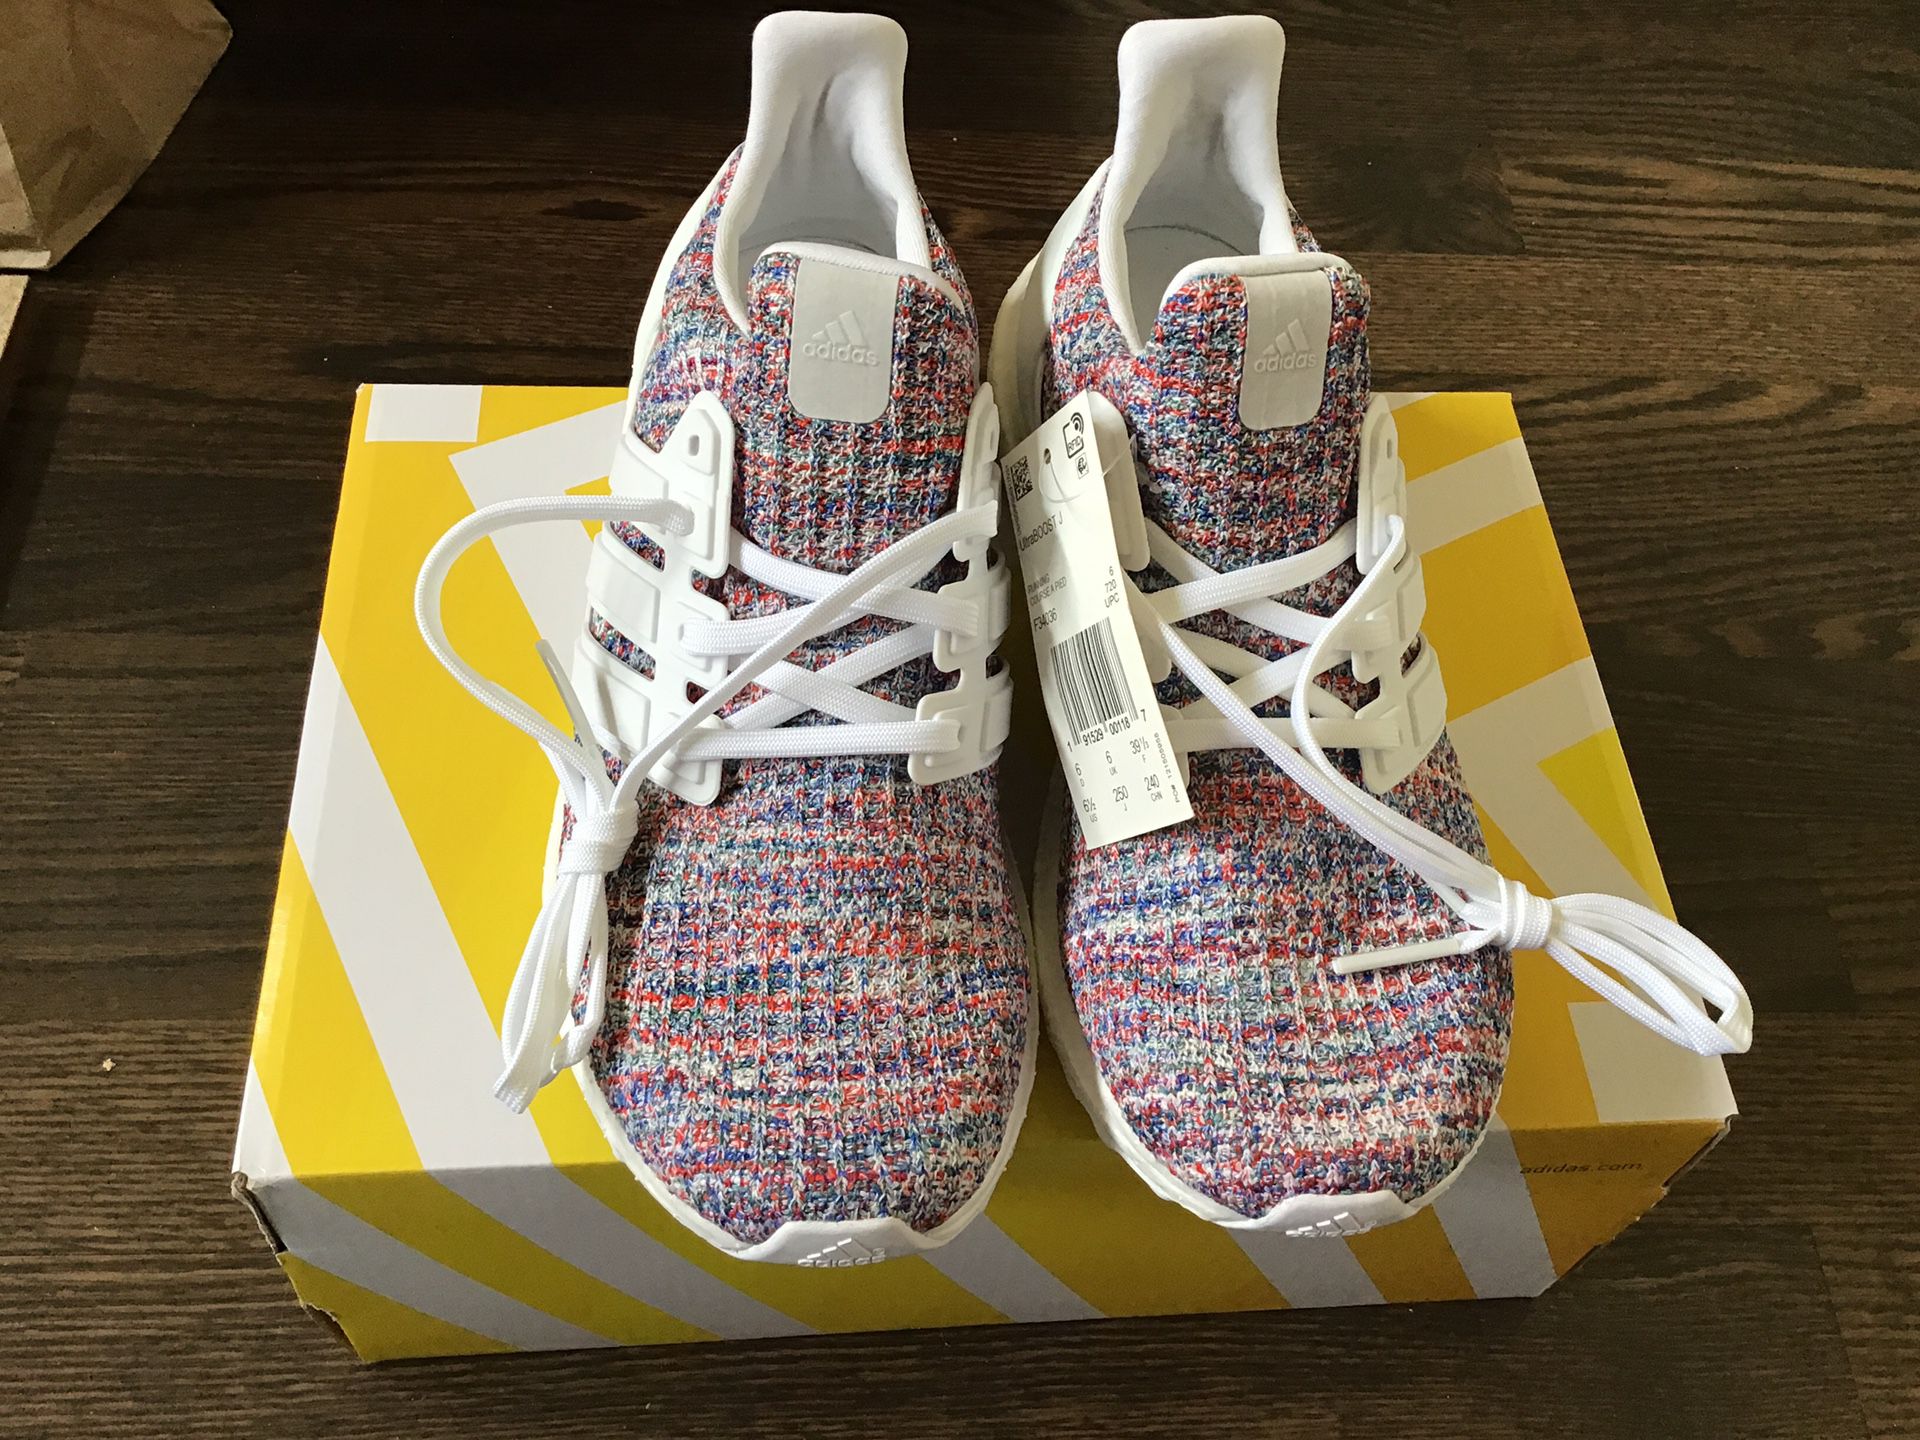 Adidas Ultraboost J Women’s Shoes, Course a Pide, Size 6, Brand new